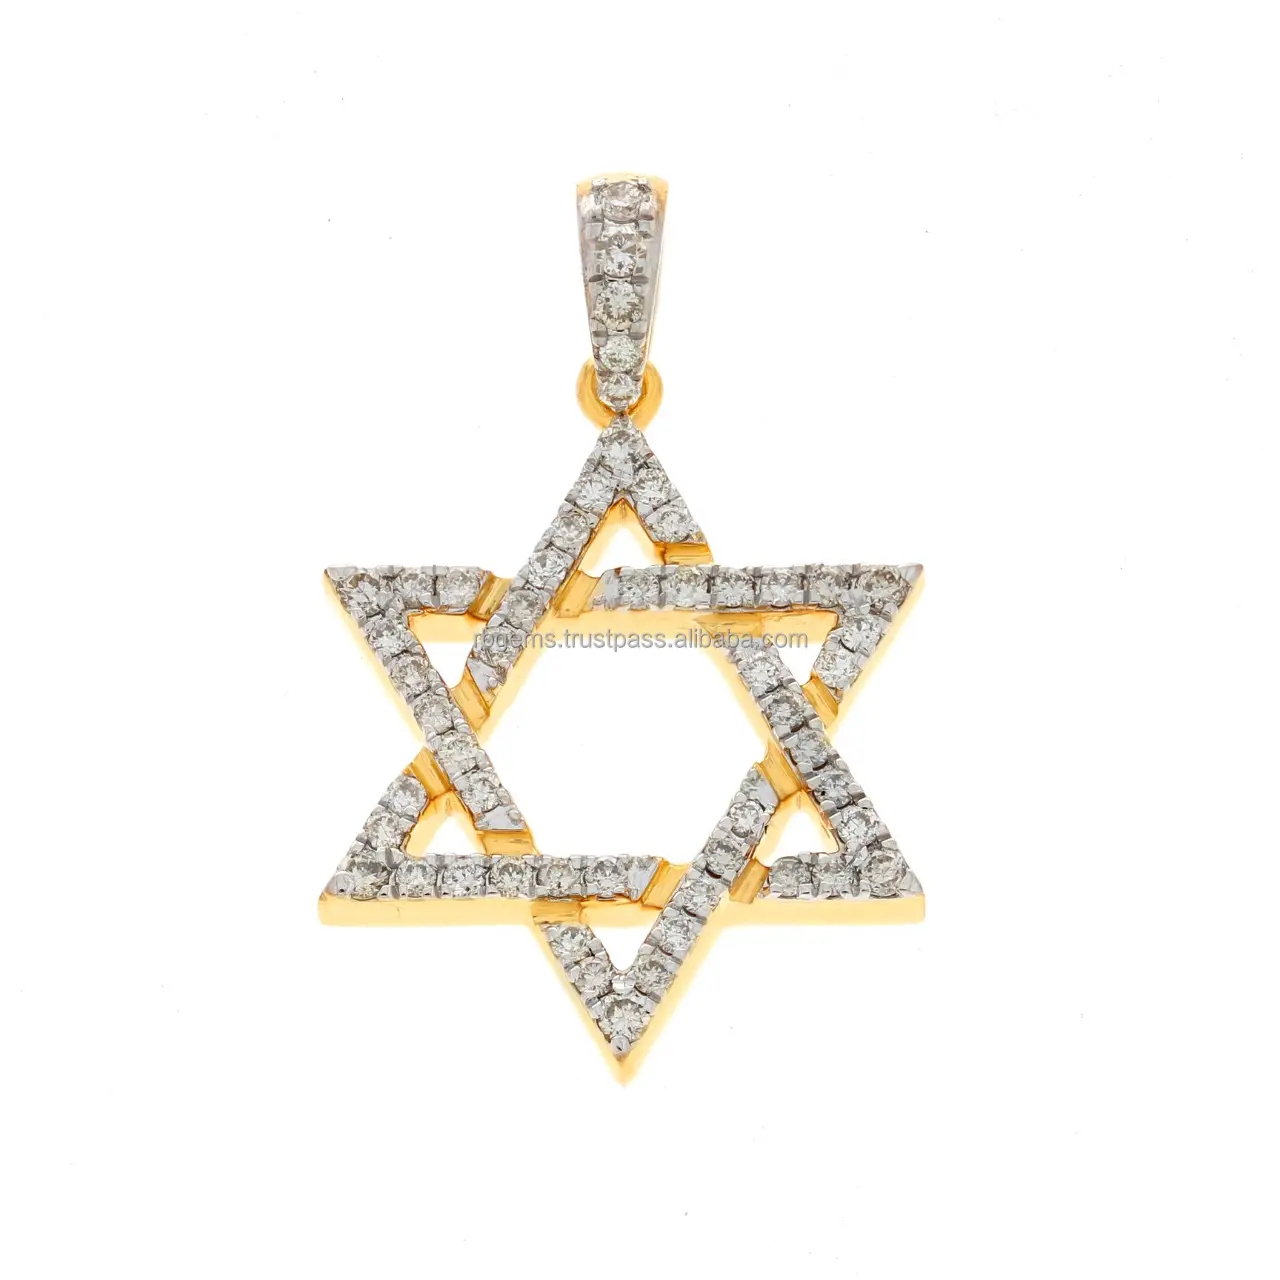 Gift perfection with a star-shaped pendant adorned with round brilliant cut diamonds, crafted in attractive 10Kt gold